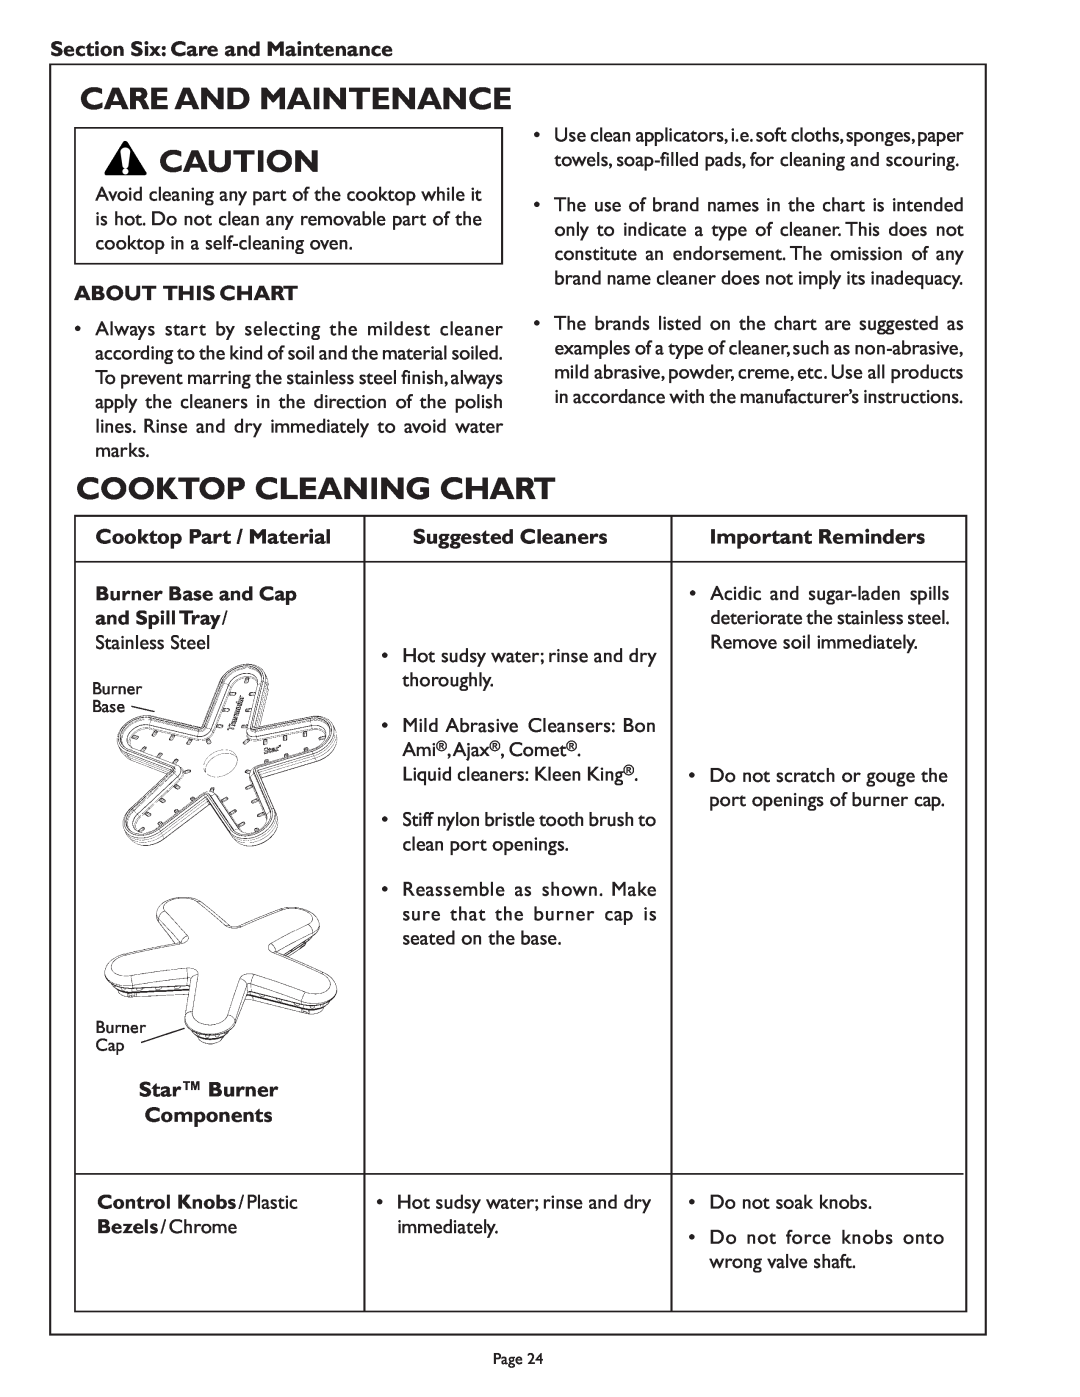 Range Kleen PSC486GD Care And Maintenance, Cooktop Cleaning Chart, Section Six Care and Maintenance, About This Chart 